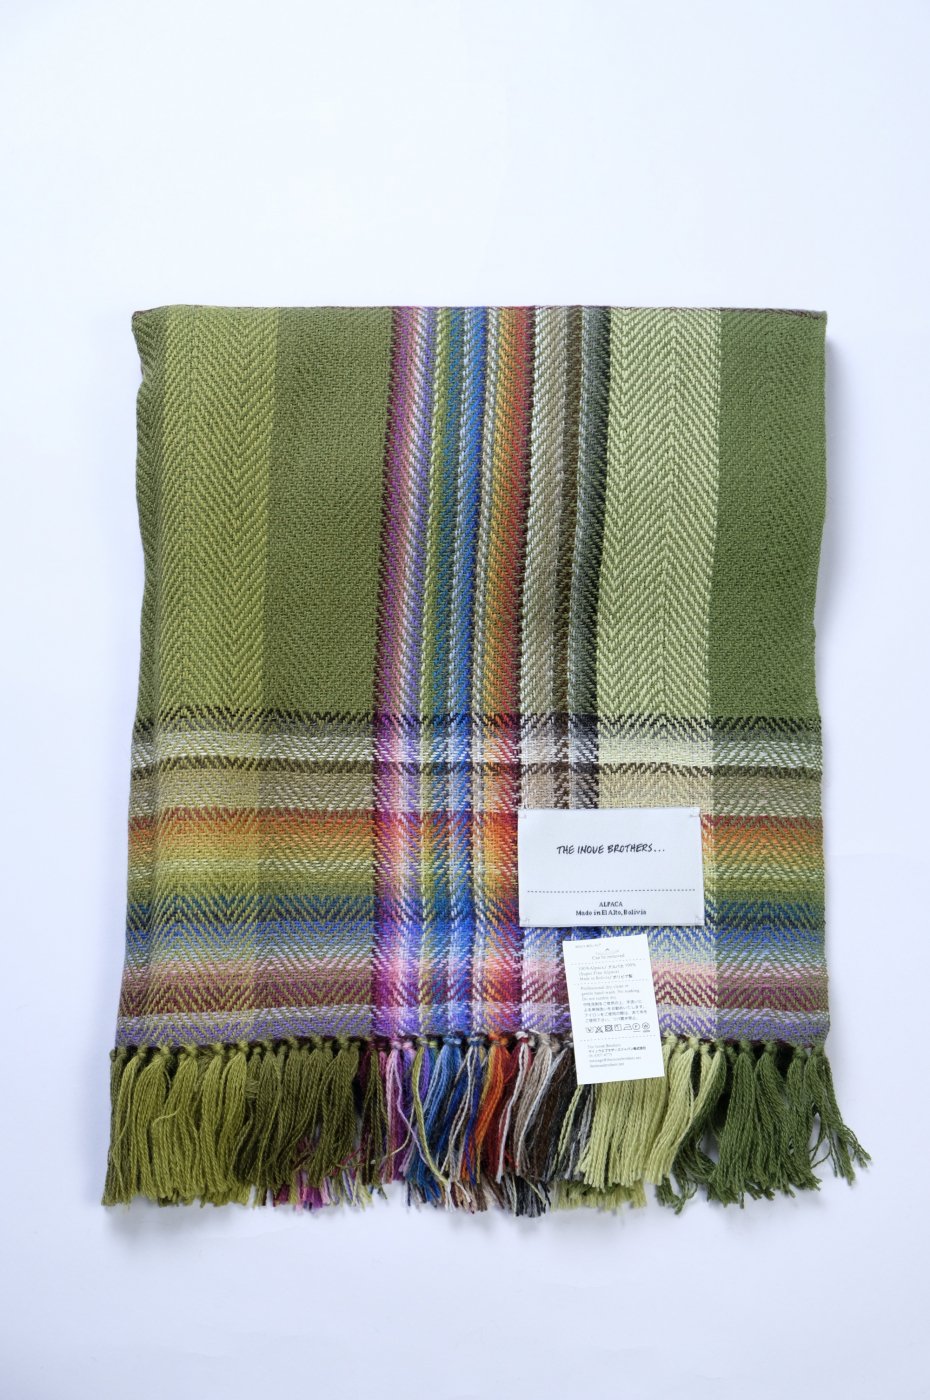 THE INOUE BROTHERS... "Multi Coloured Scarf / GREEN"